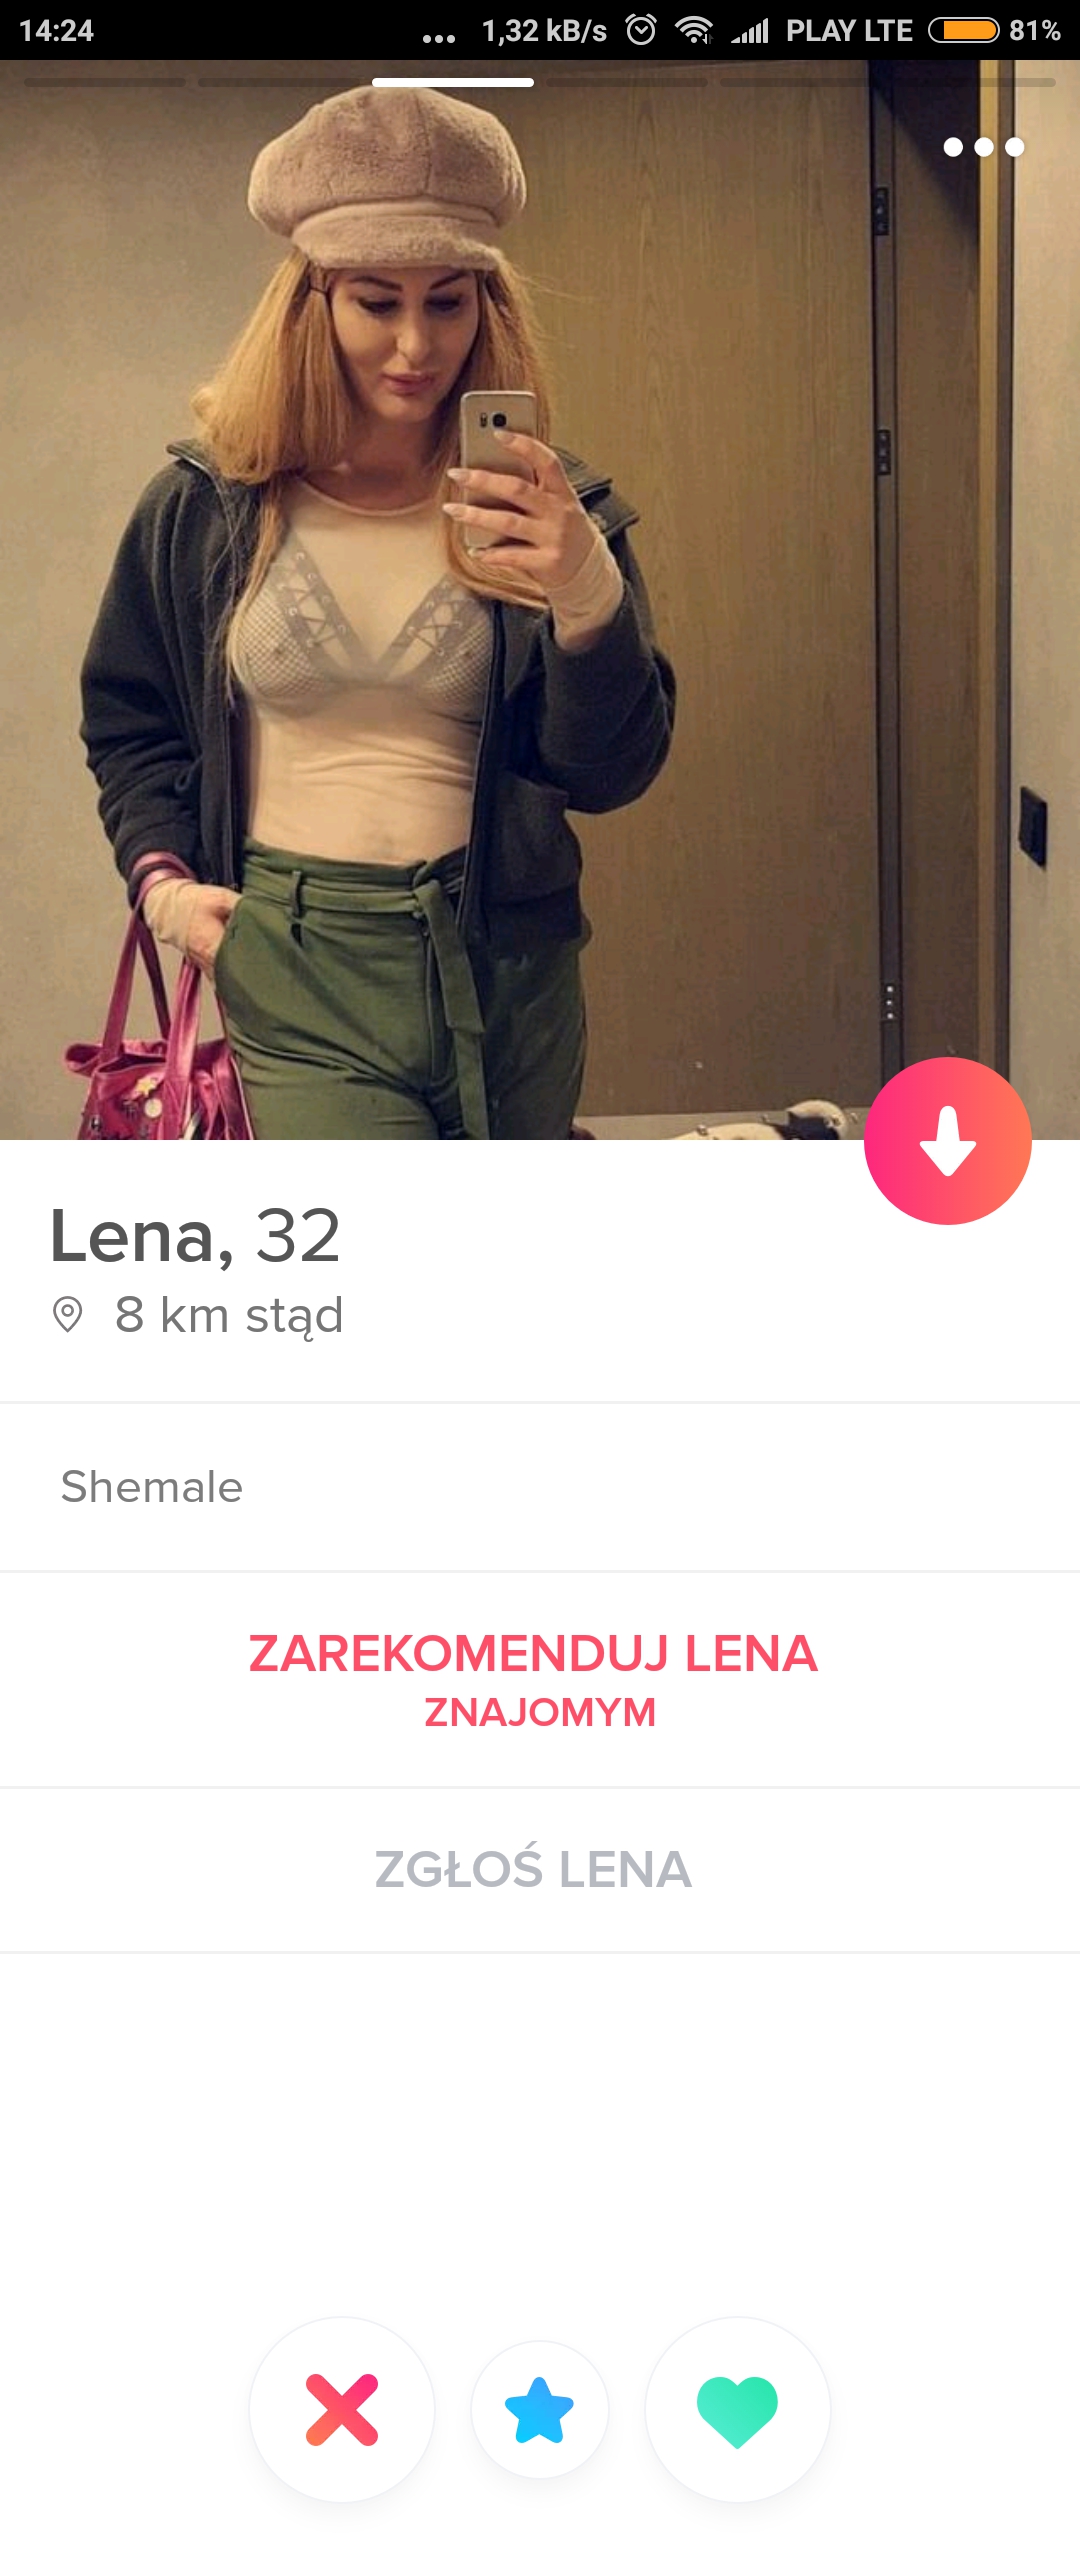 The tinder trap